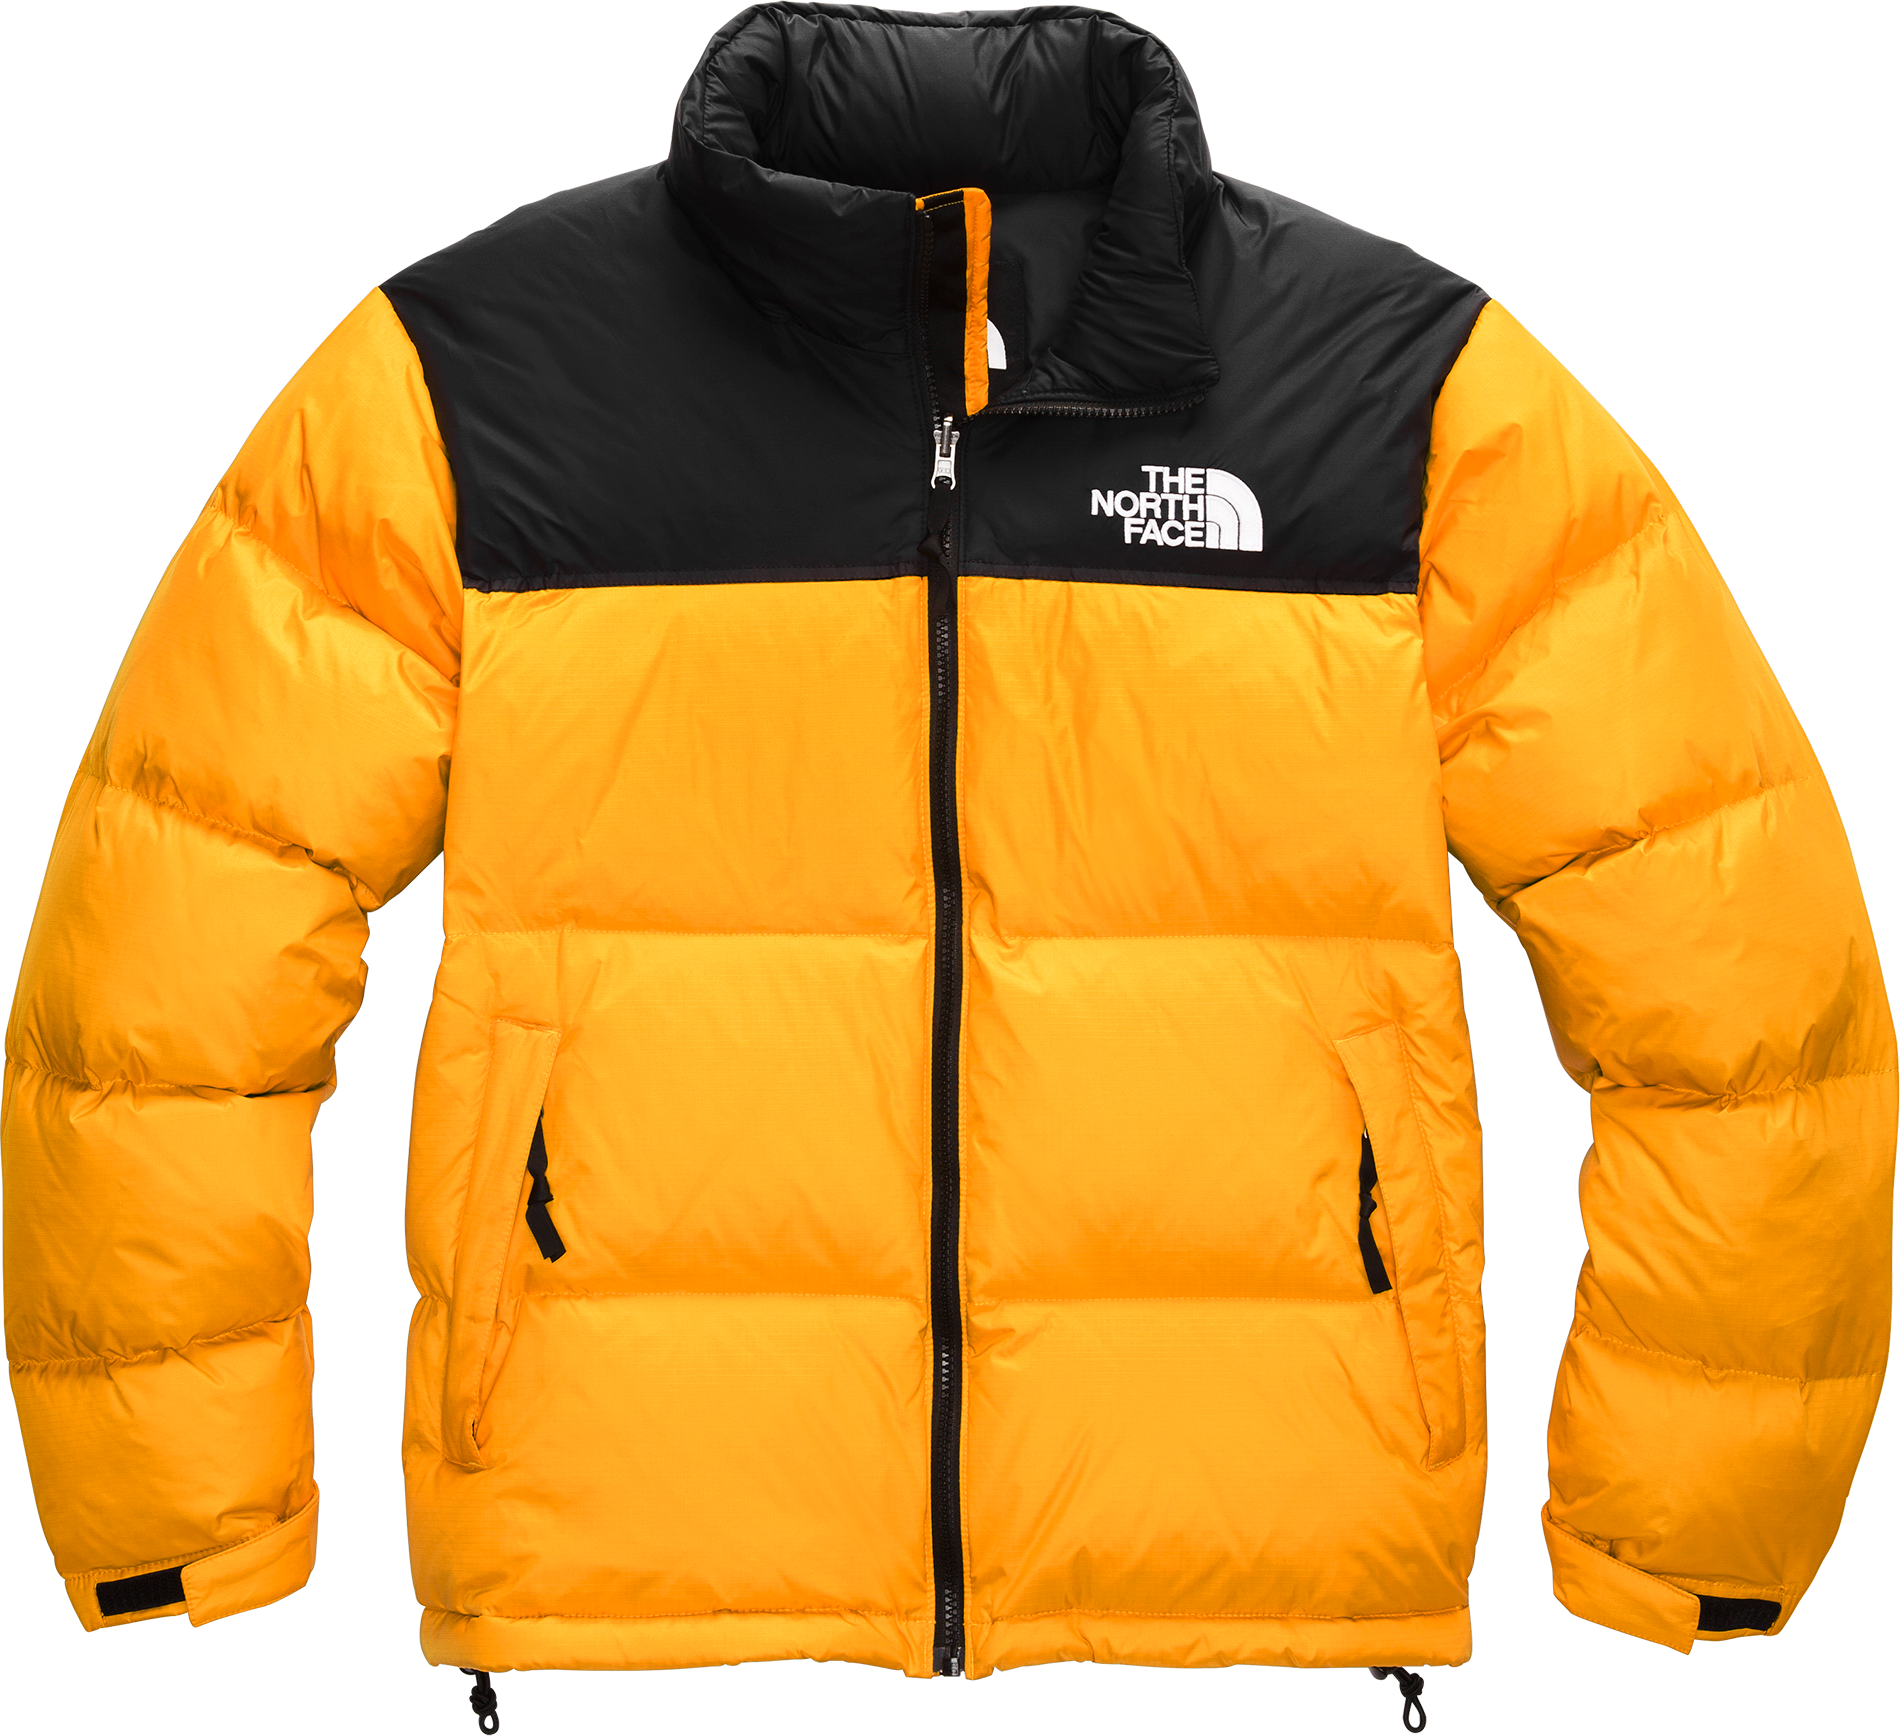 The North Face Icons Iconic Jackets Bags And Fleece